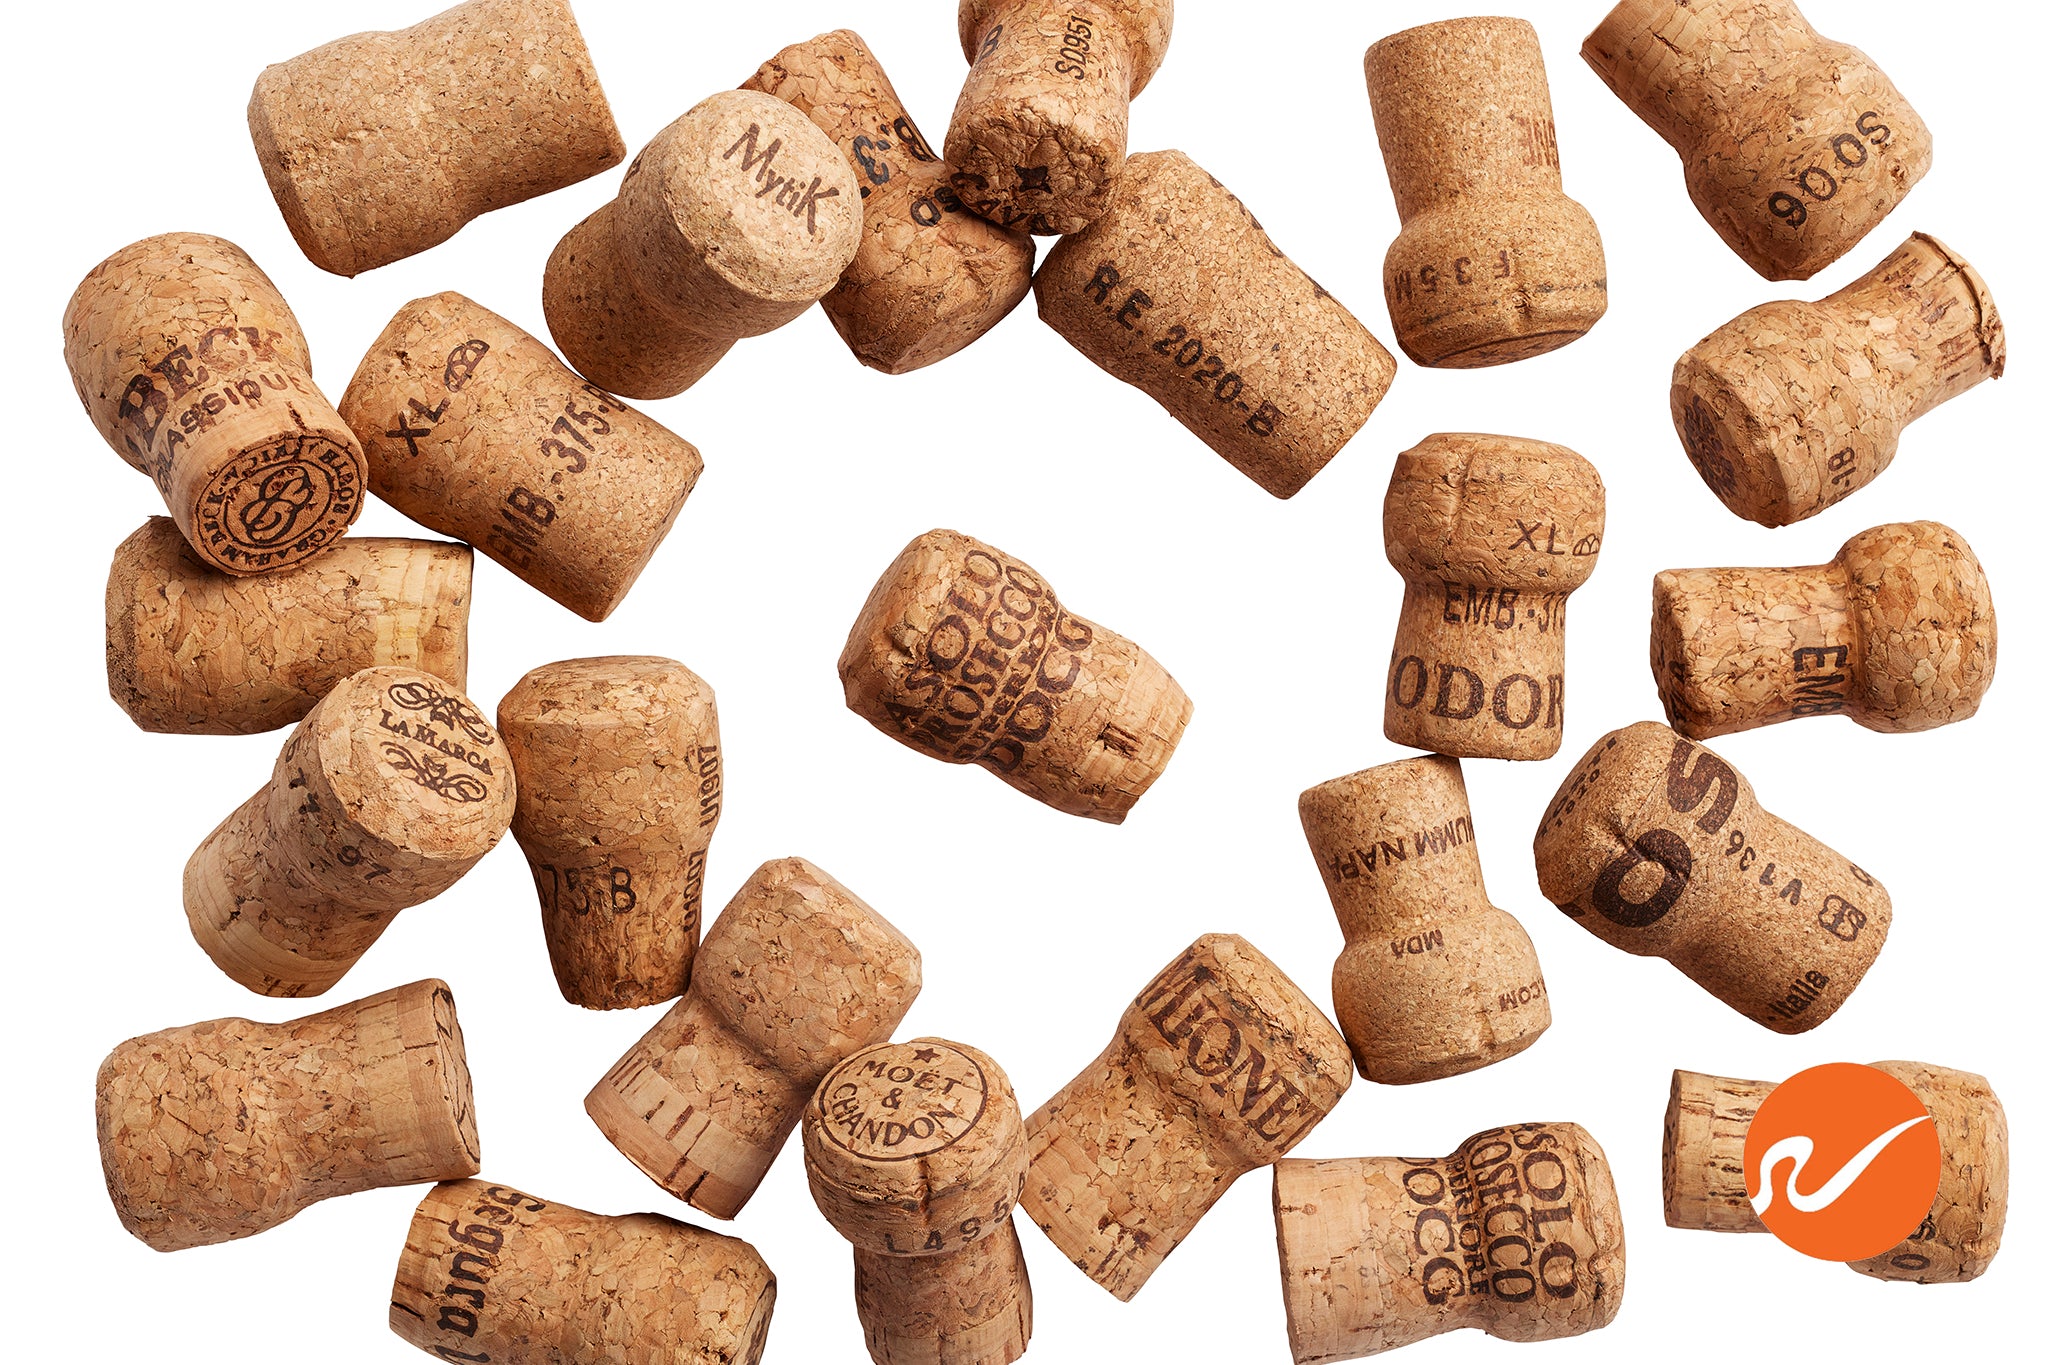 Used Champagne Corks